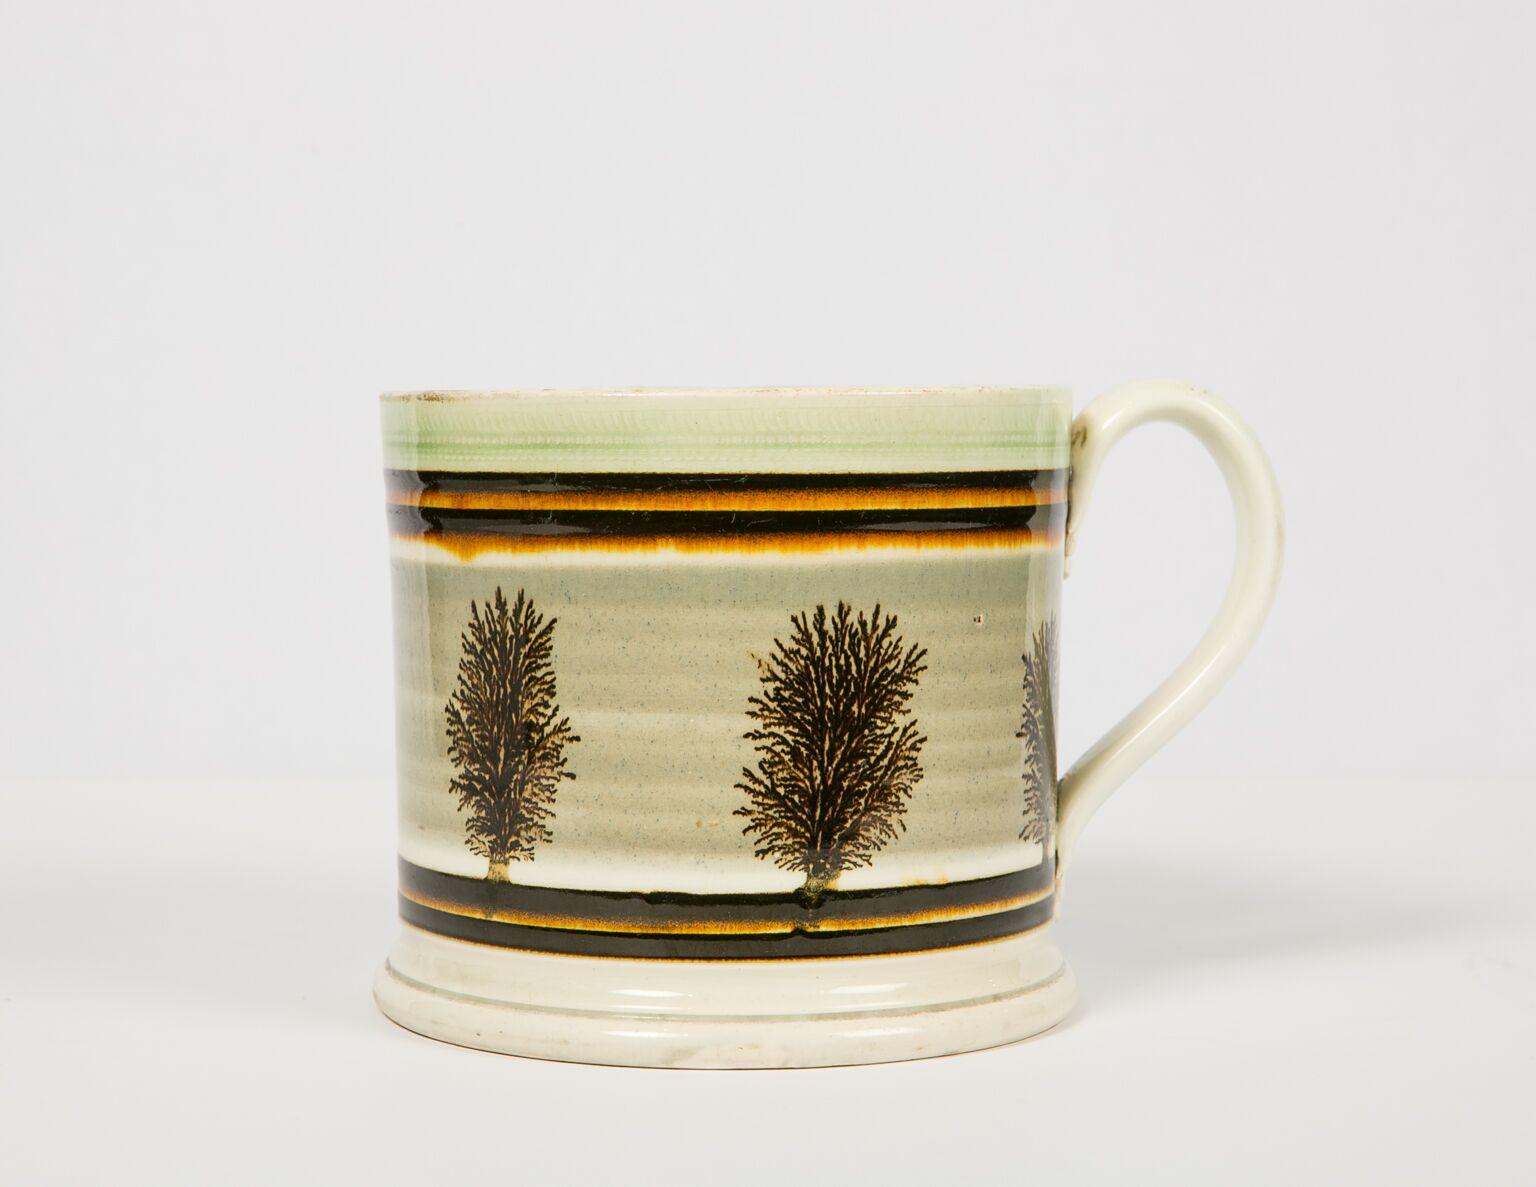 WHY WE LOVE IT: A perfect combination of form and decoration
We are delighted to offer this mochaware quart mug. Made in England, circa 1825 it is a masterpiece of mochaware. It has a strong presence and is beautiful. The decoration all works